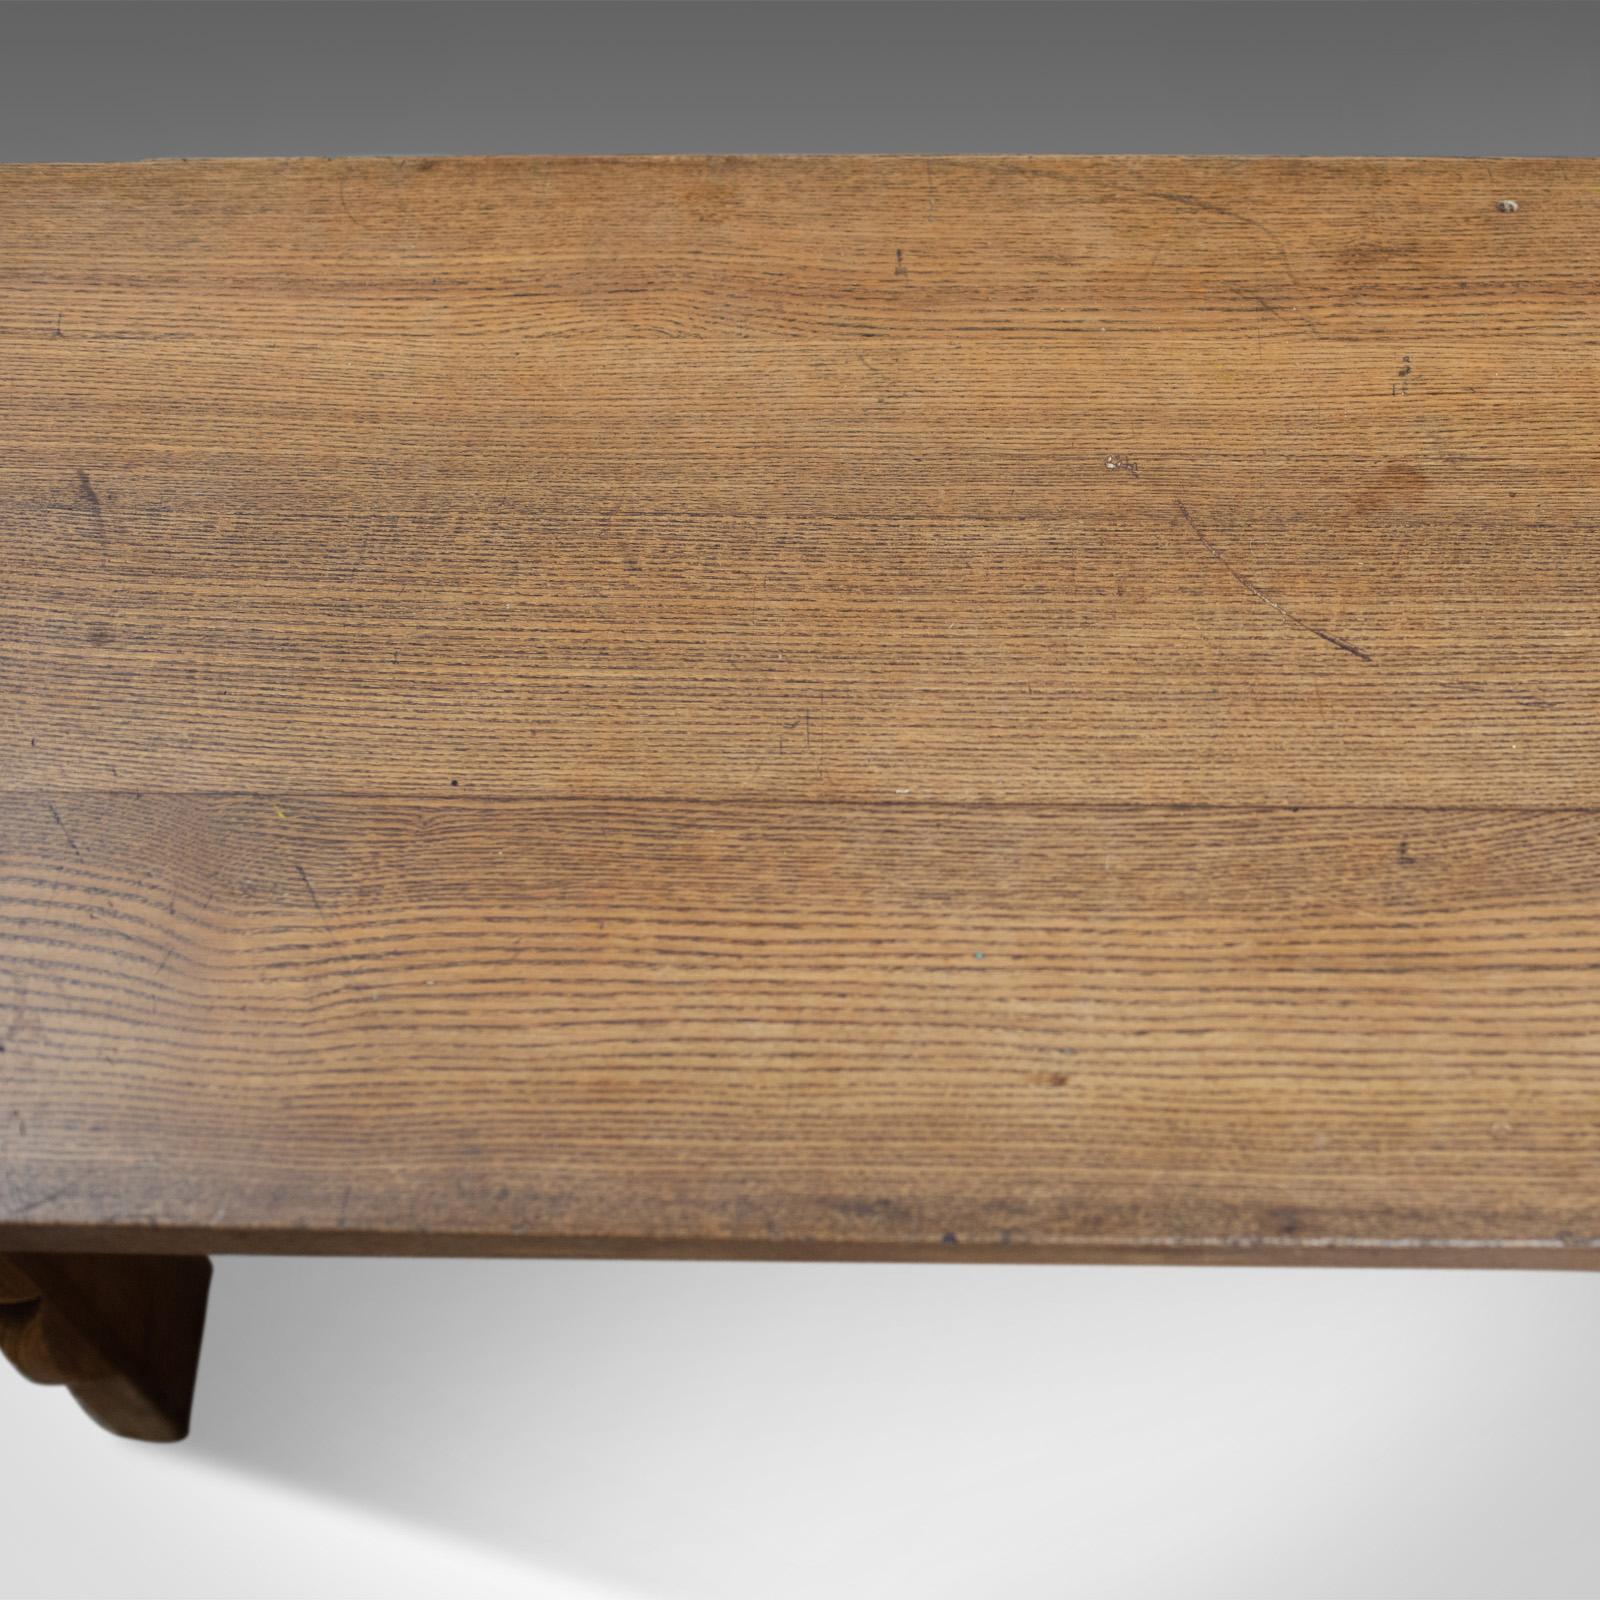 Arts & Crafts Oak Bench, English, Early 20th Century, Two-Seat Form 1